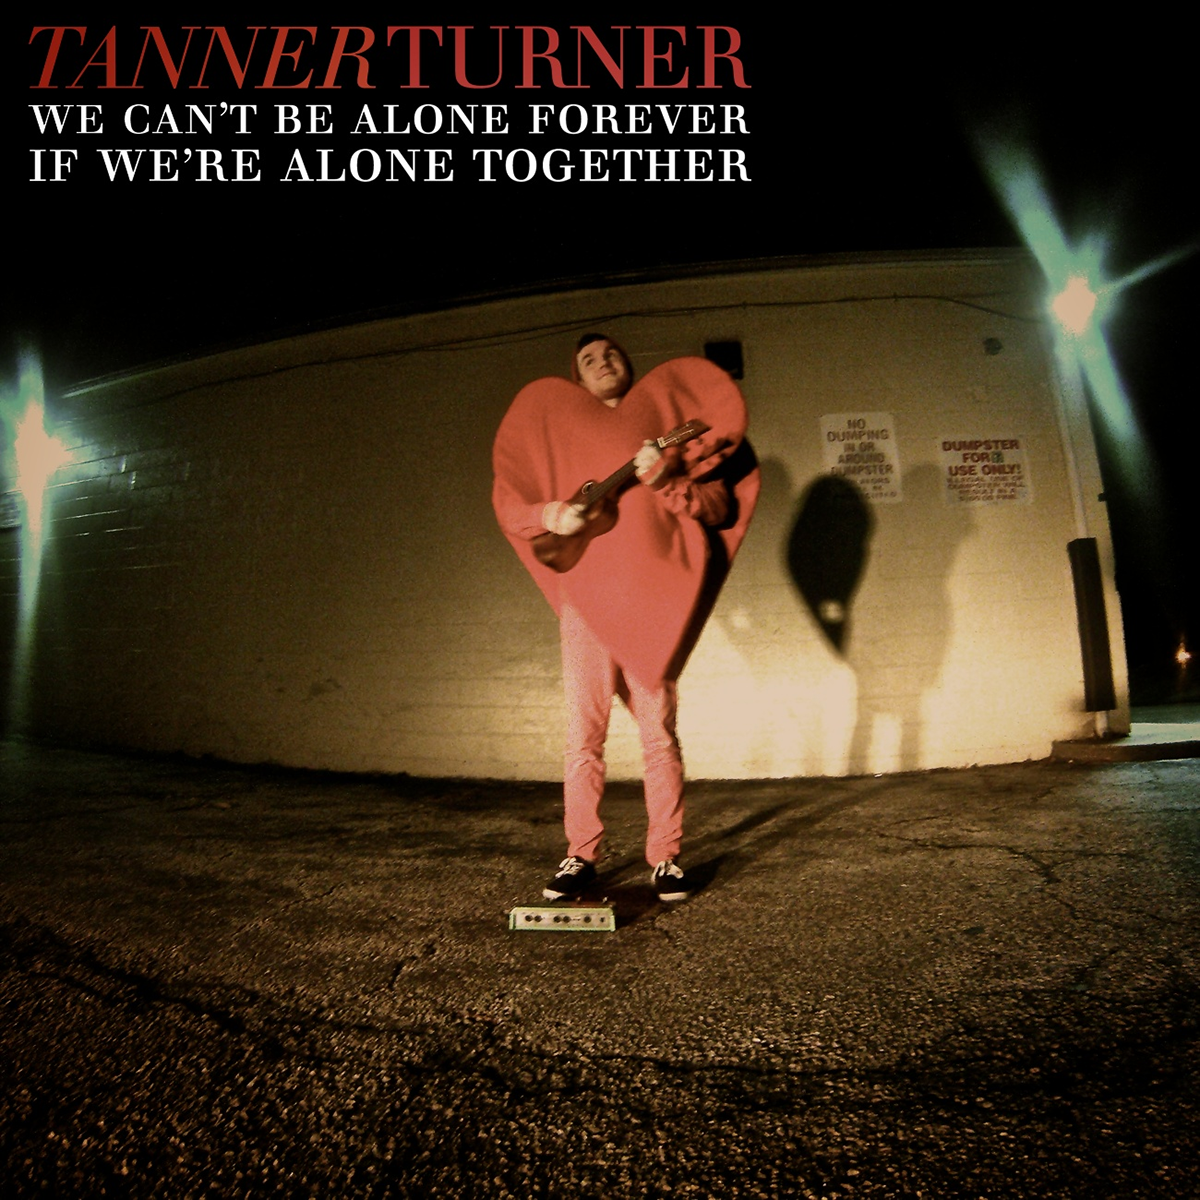 indie tanner/turner album art photoshop wide-angle lens